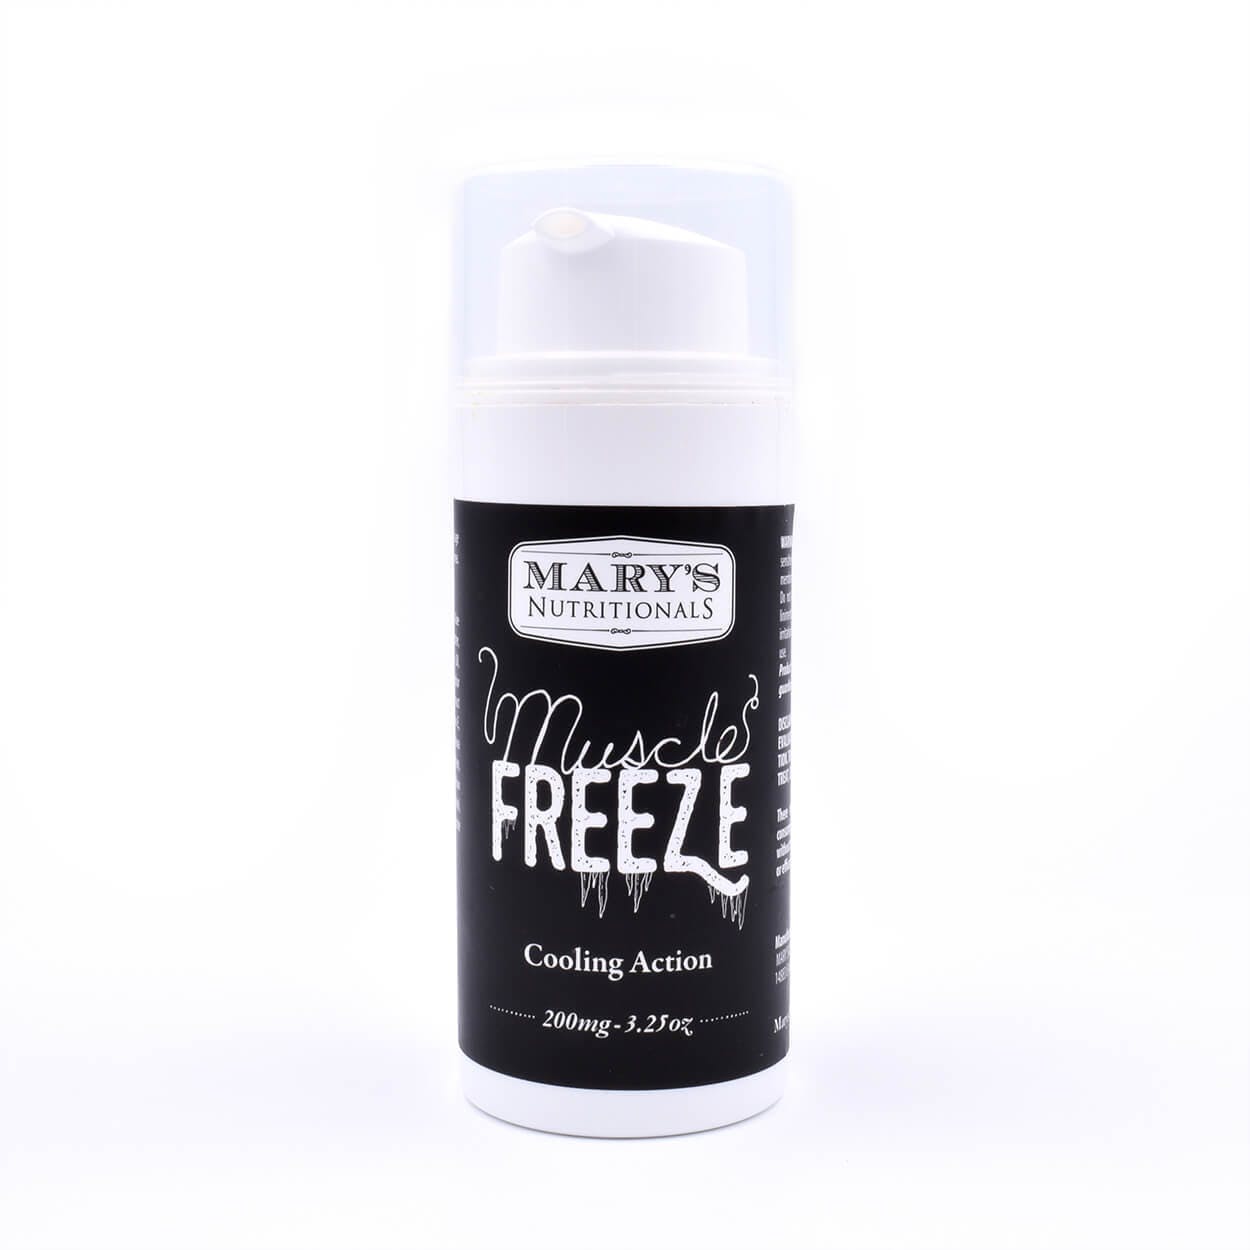 CBD Muscle Freeze 200mg (Mary's Nutritionals)